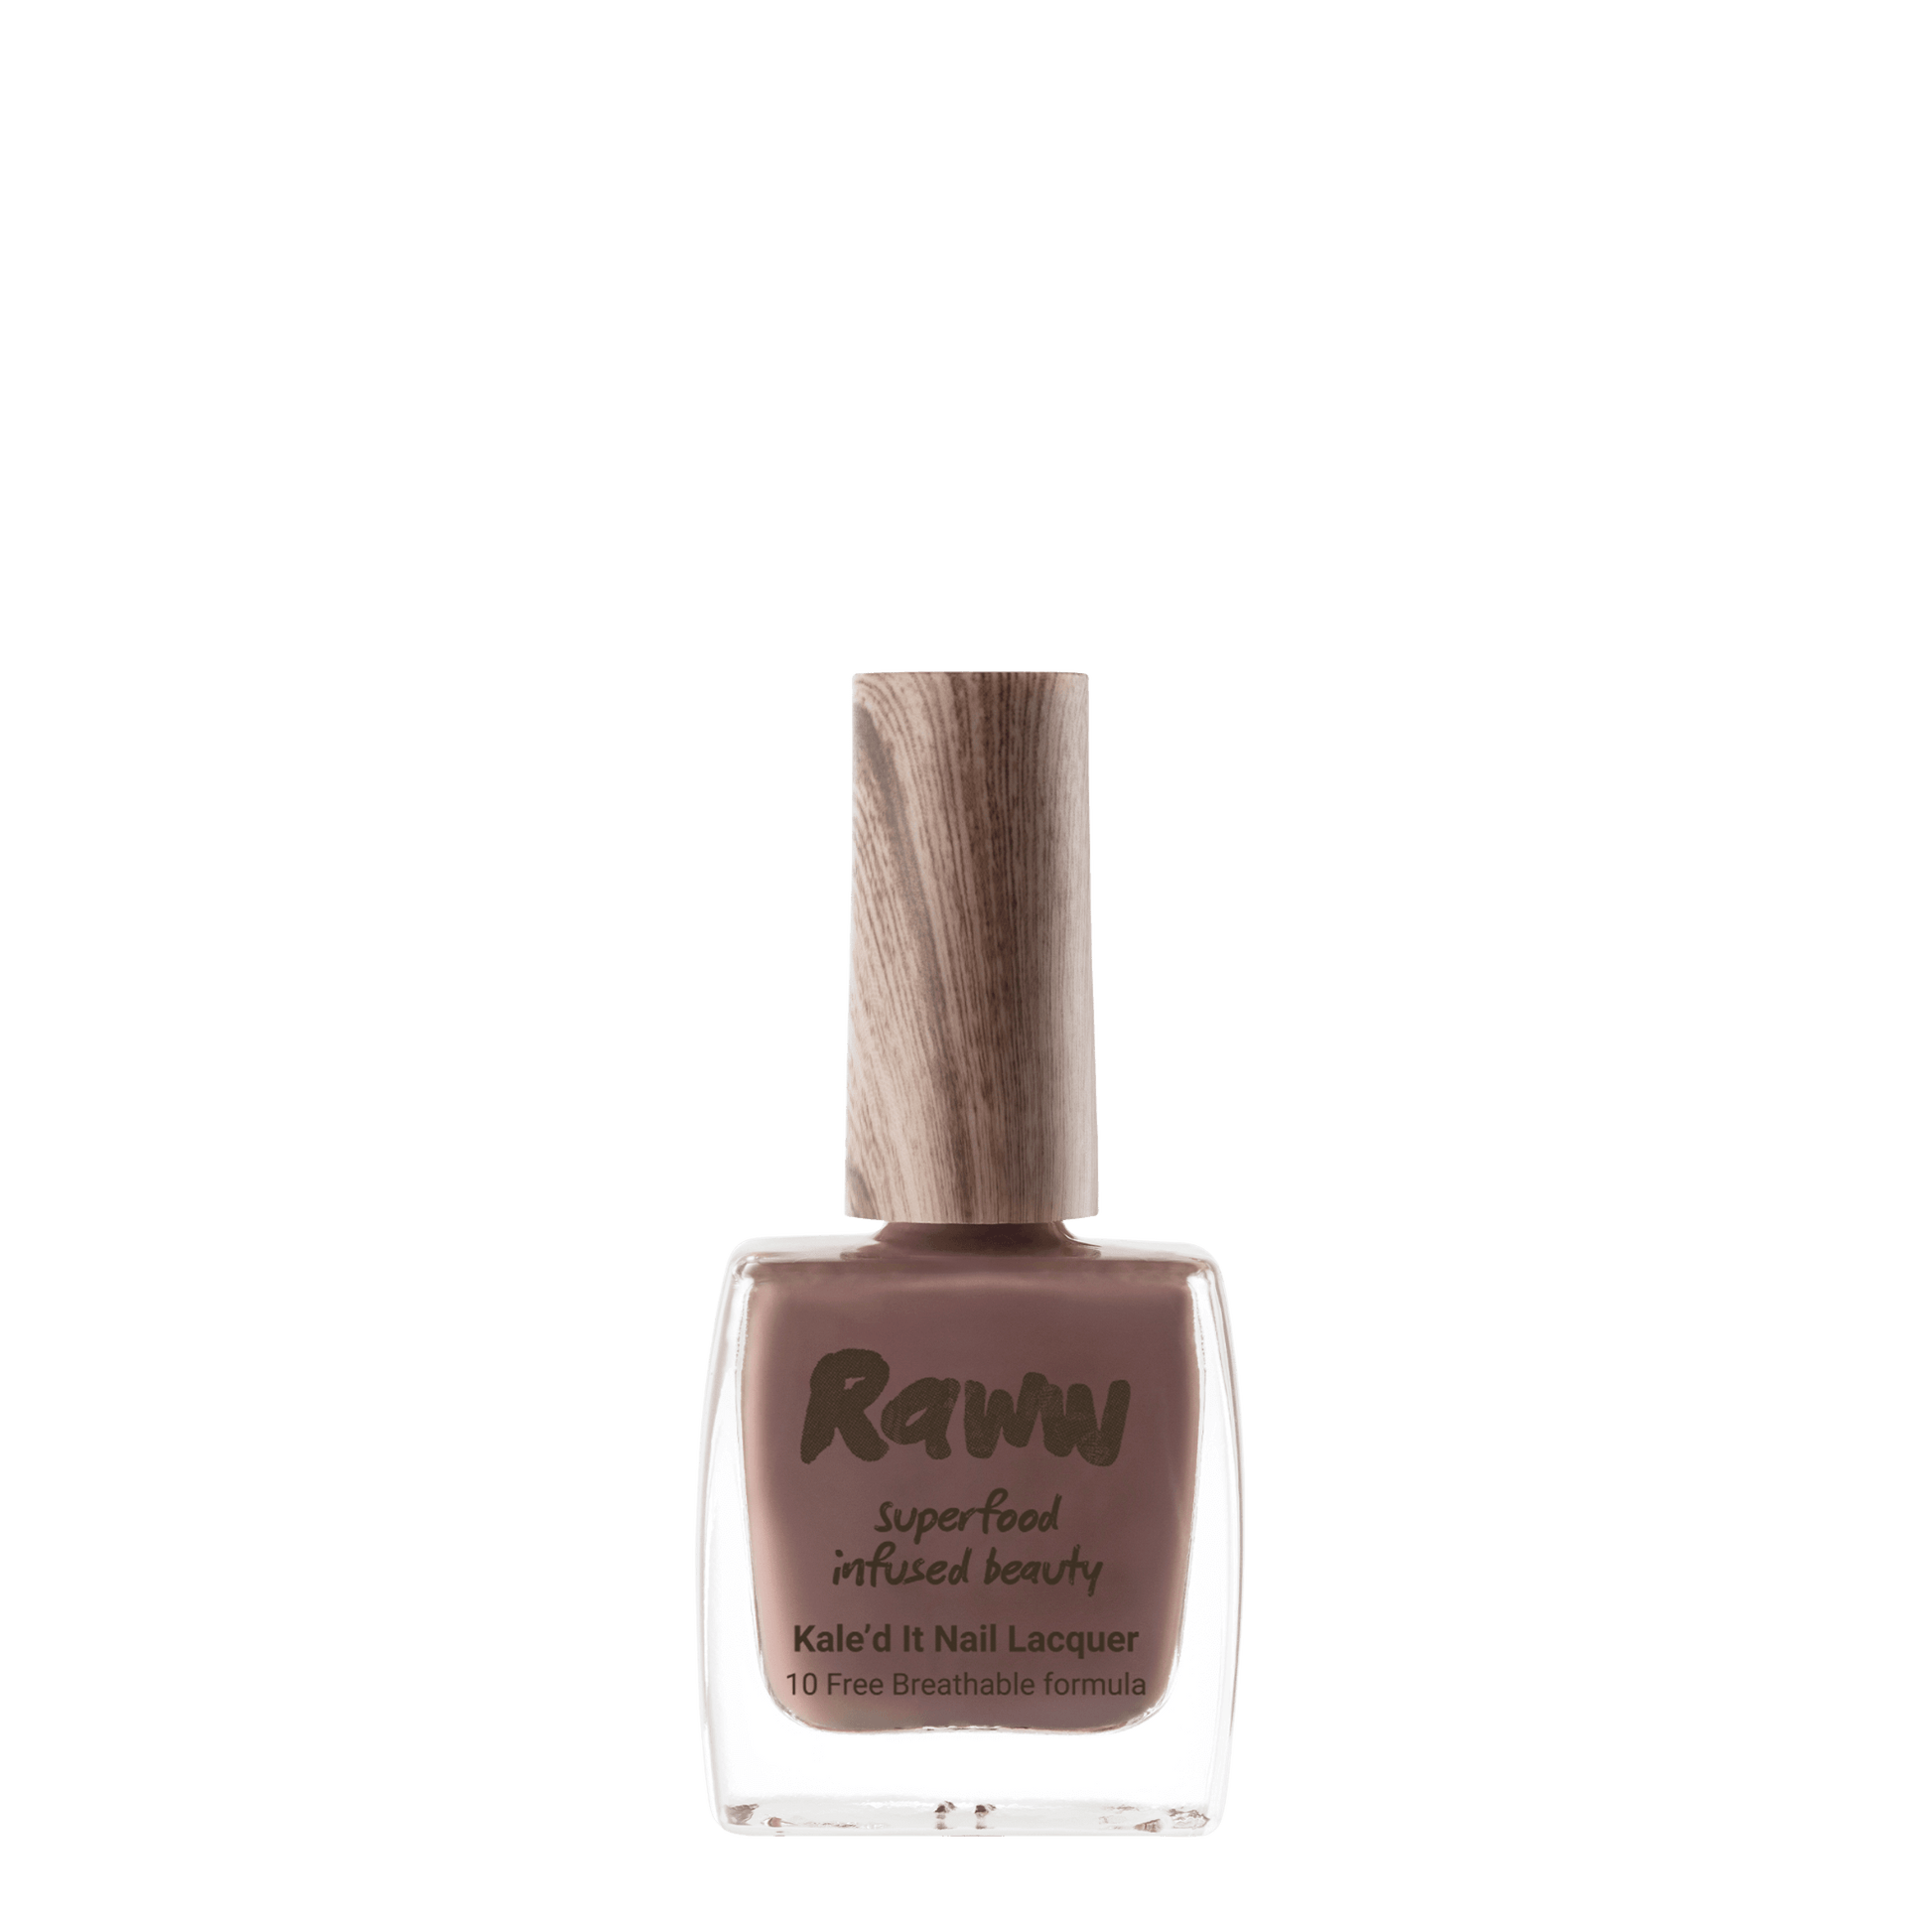 Kale'D It Nail Lacquer (I'm Going Cocoa) | RAWW Cosmetics | 01